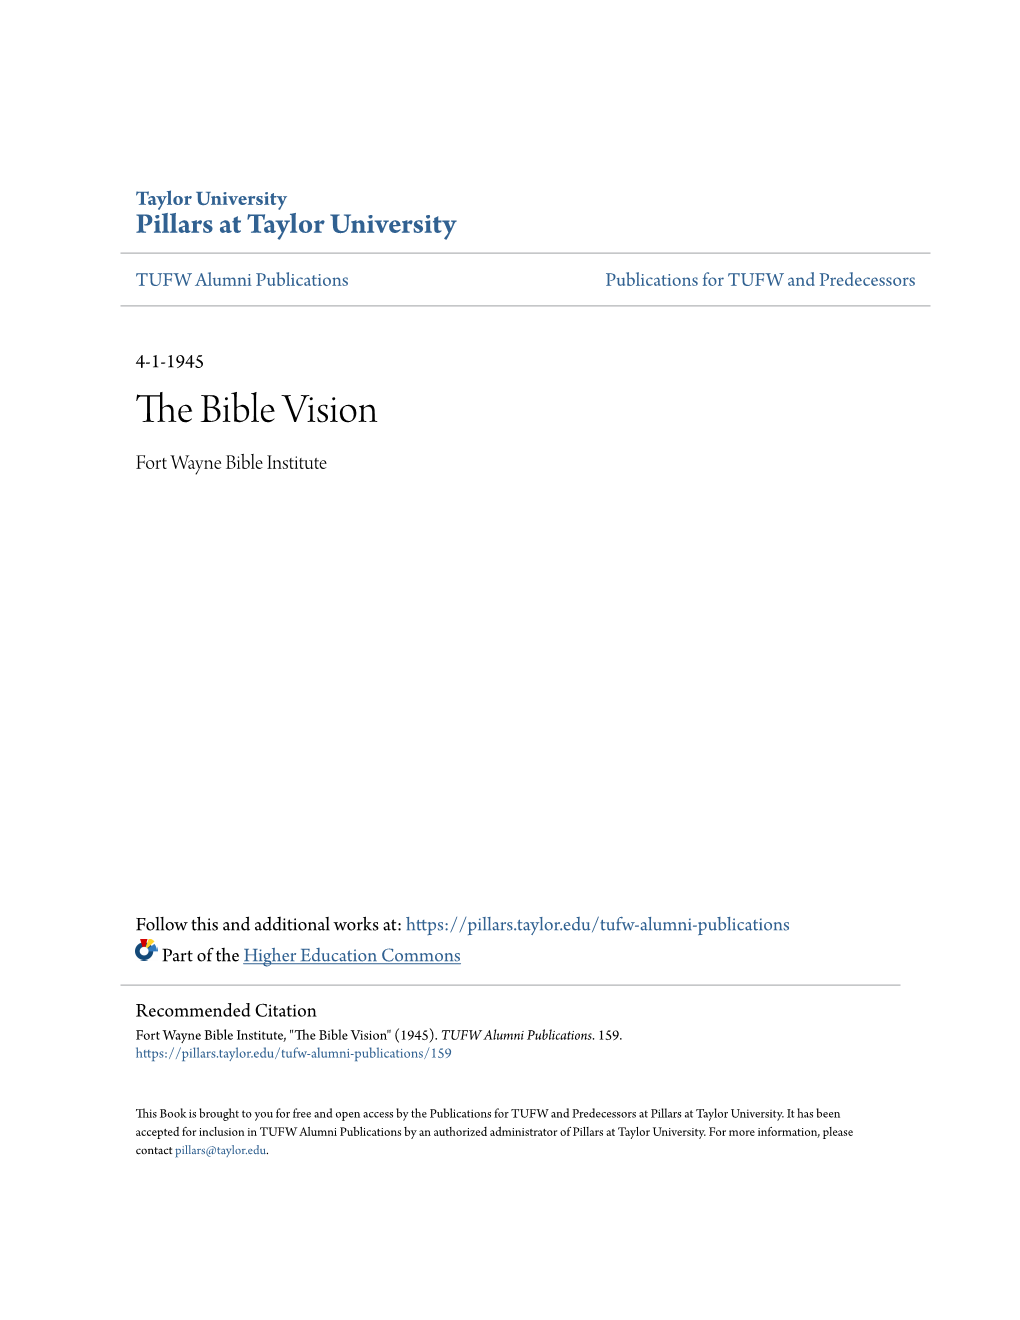 THE BIBLE VISION a Bimonthly Journal Reflecting the Light of the Bible on Us and Our Times